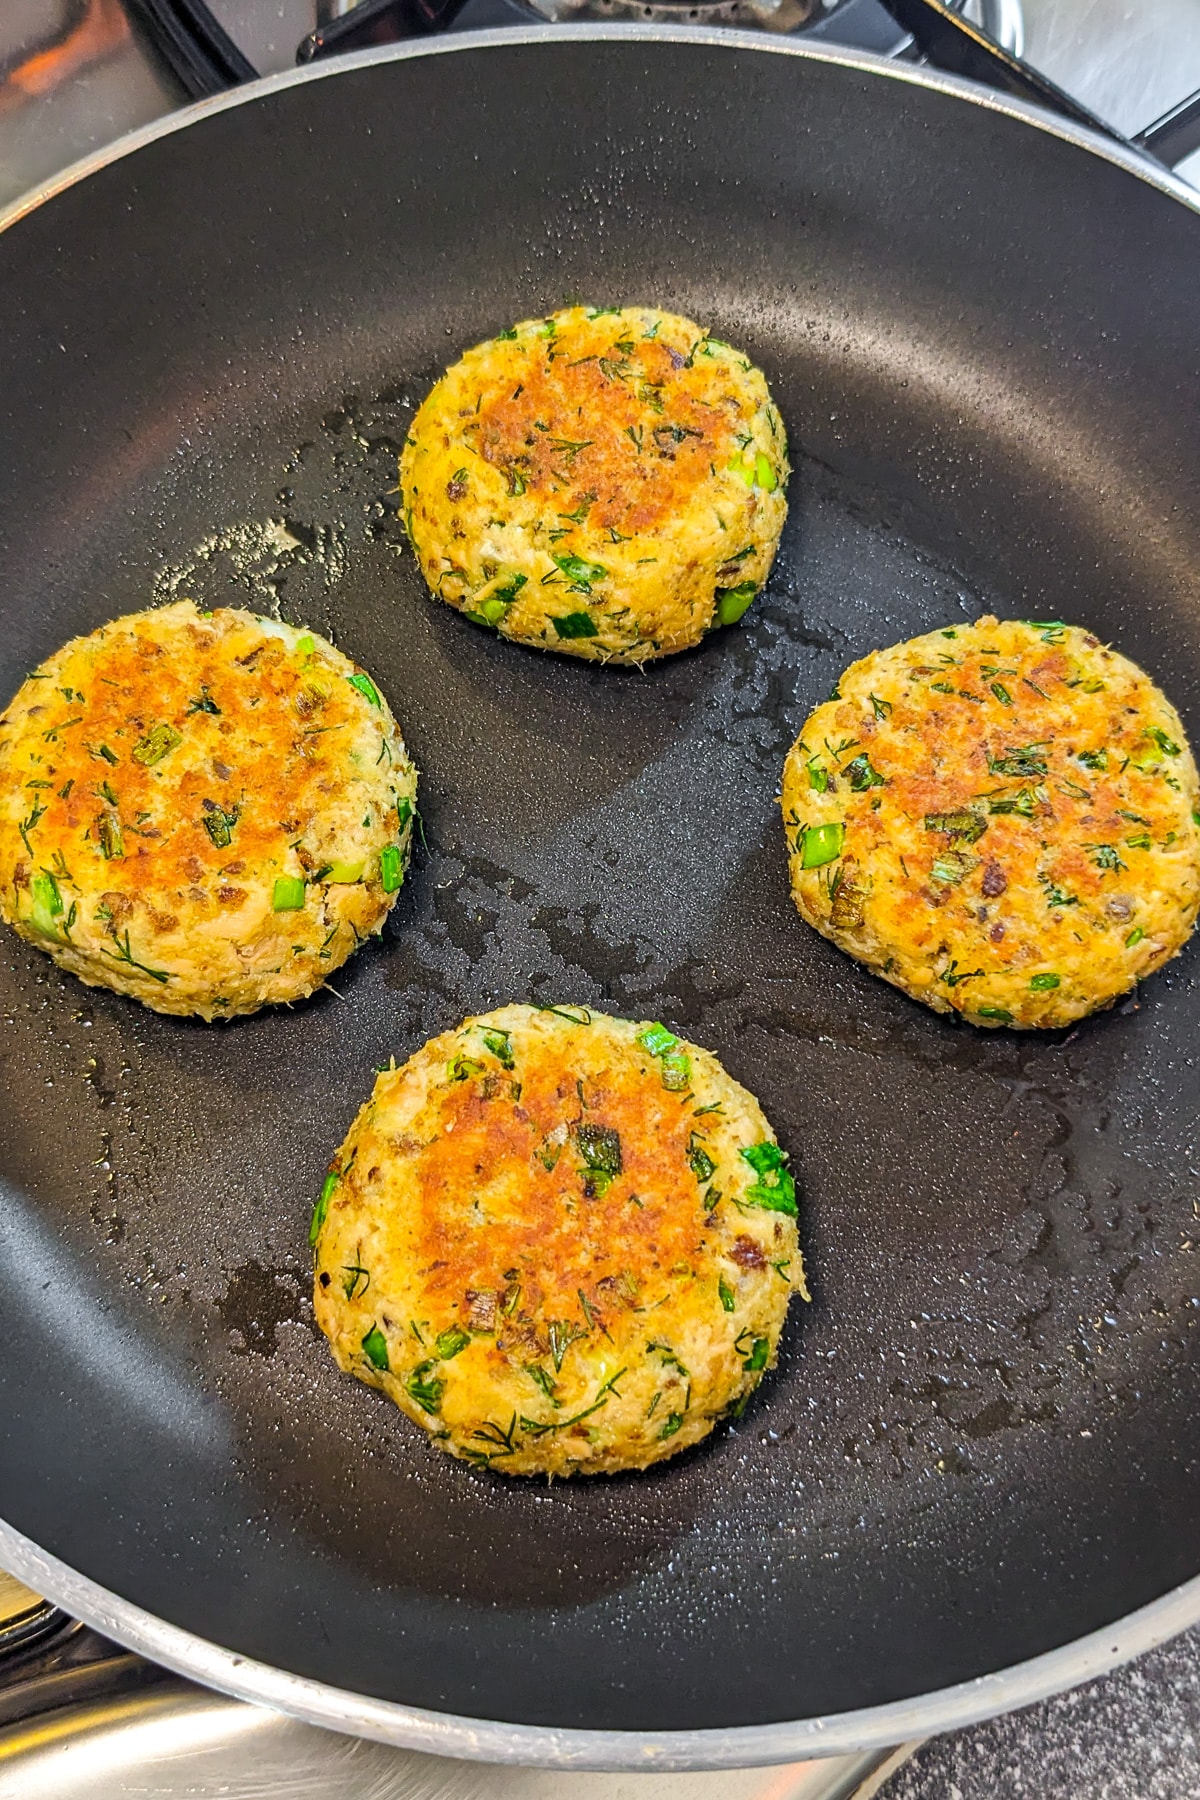 4 salmon patties in a frying pan on the stove.